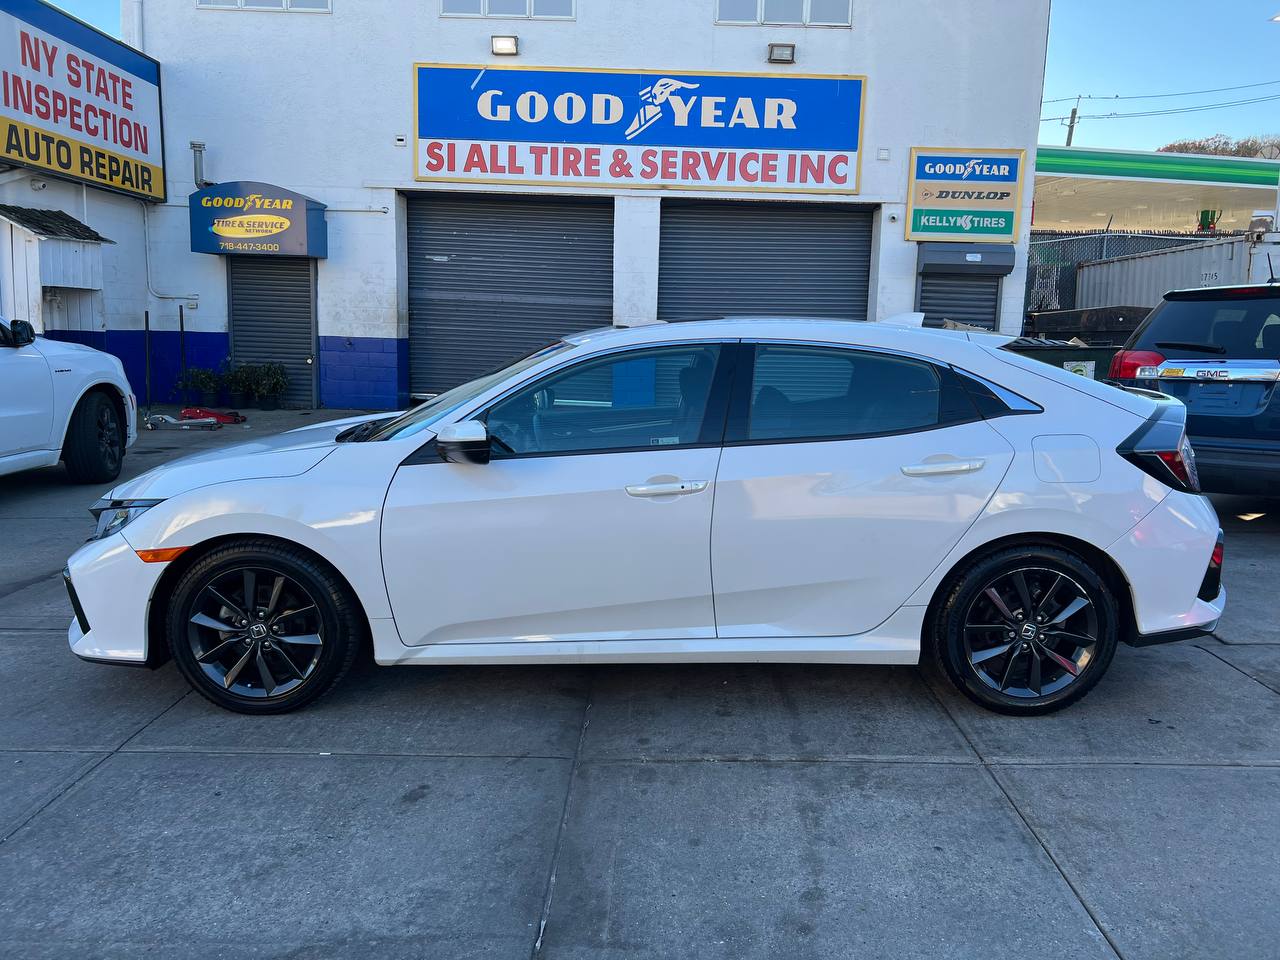 Used - Honda CIVIC EX Hatchback for sale in Staten Island NY